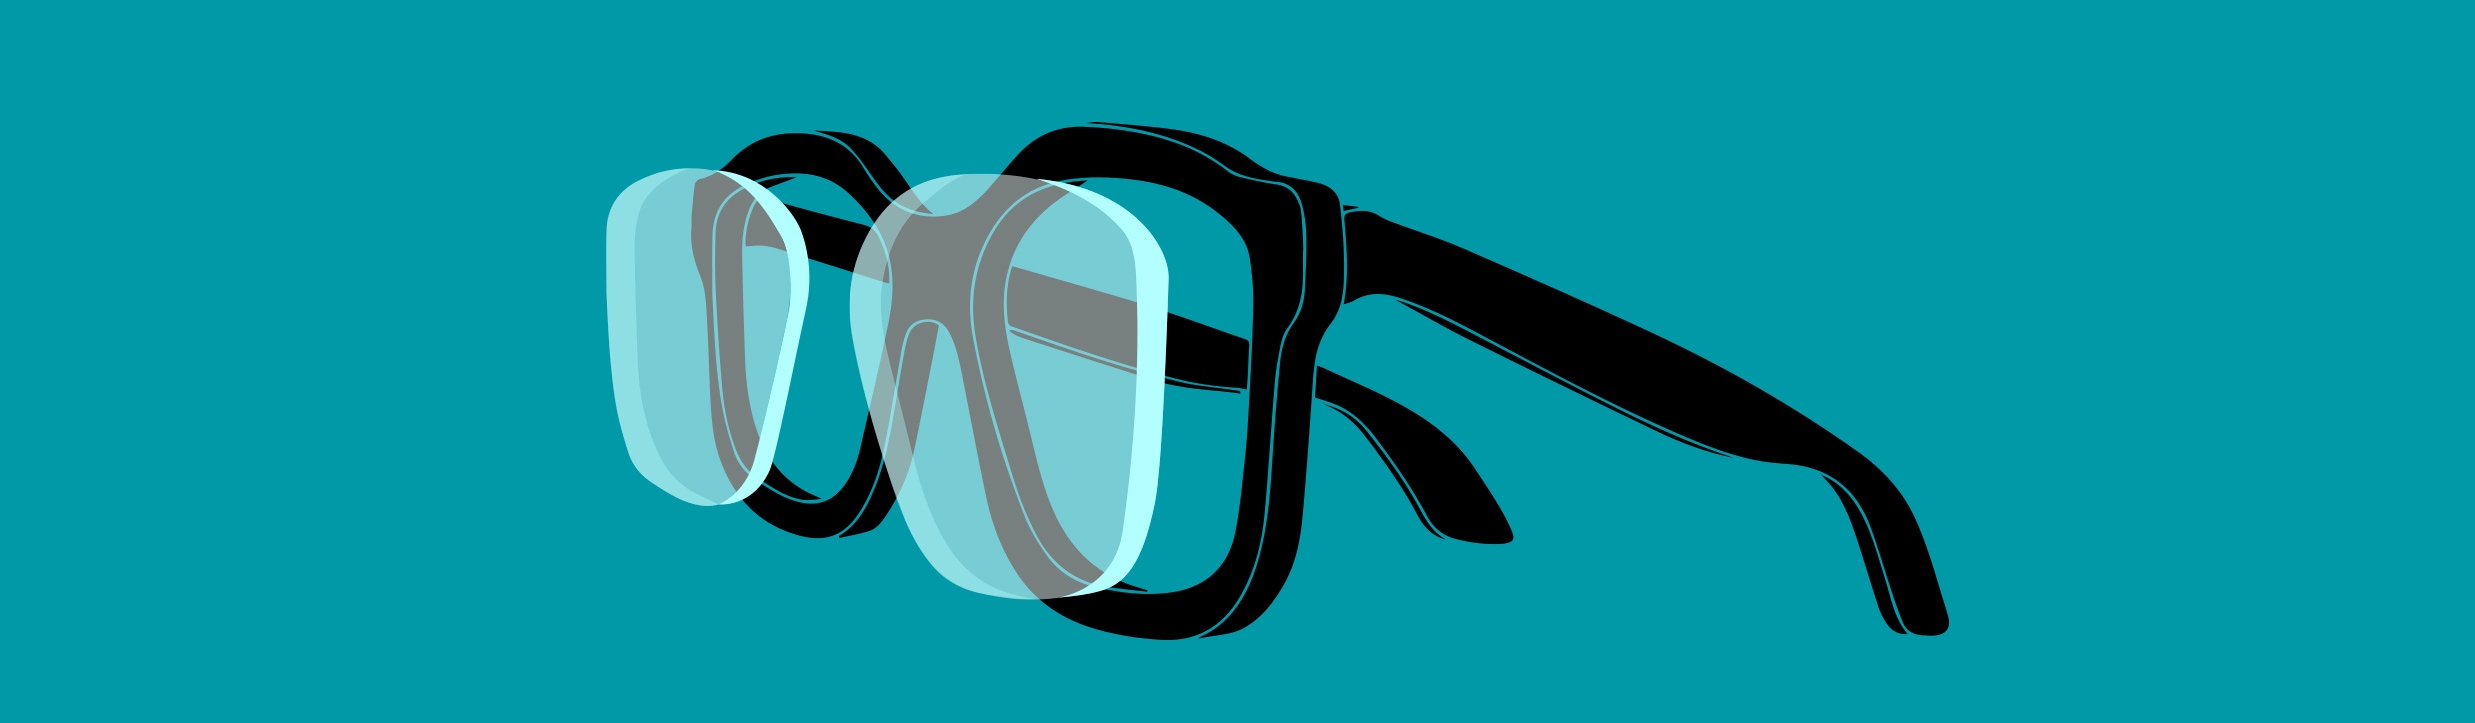 Illustration of glasses with lenses protruding from frame to show thickness.